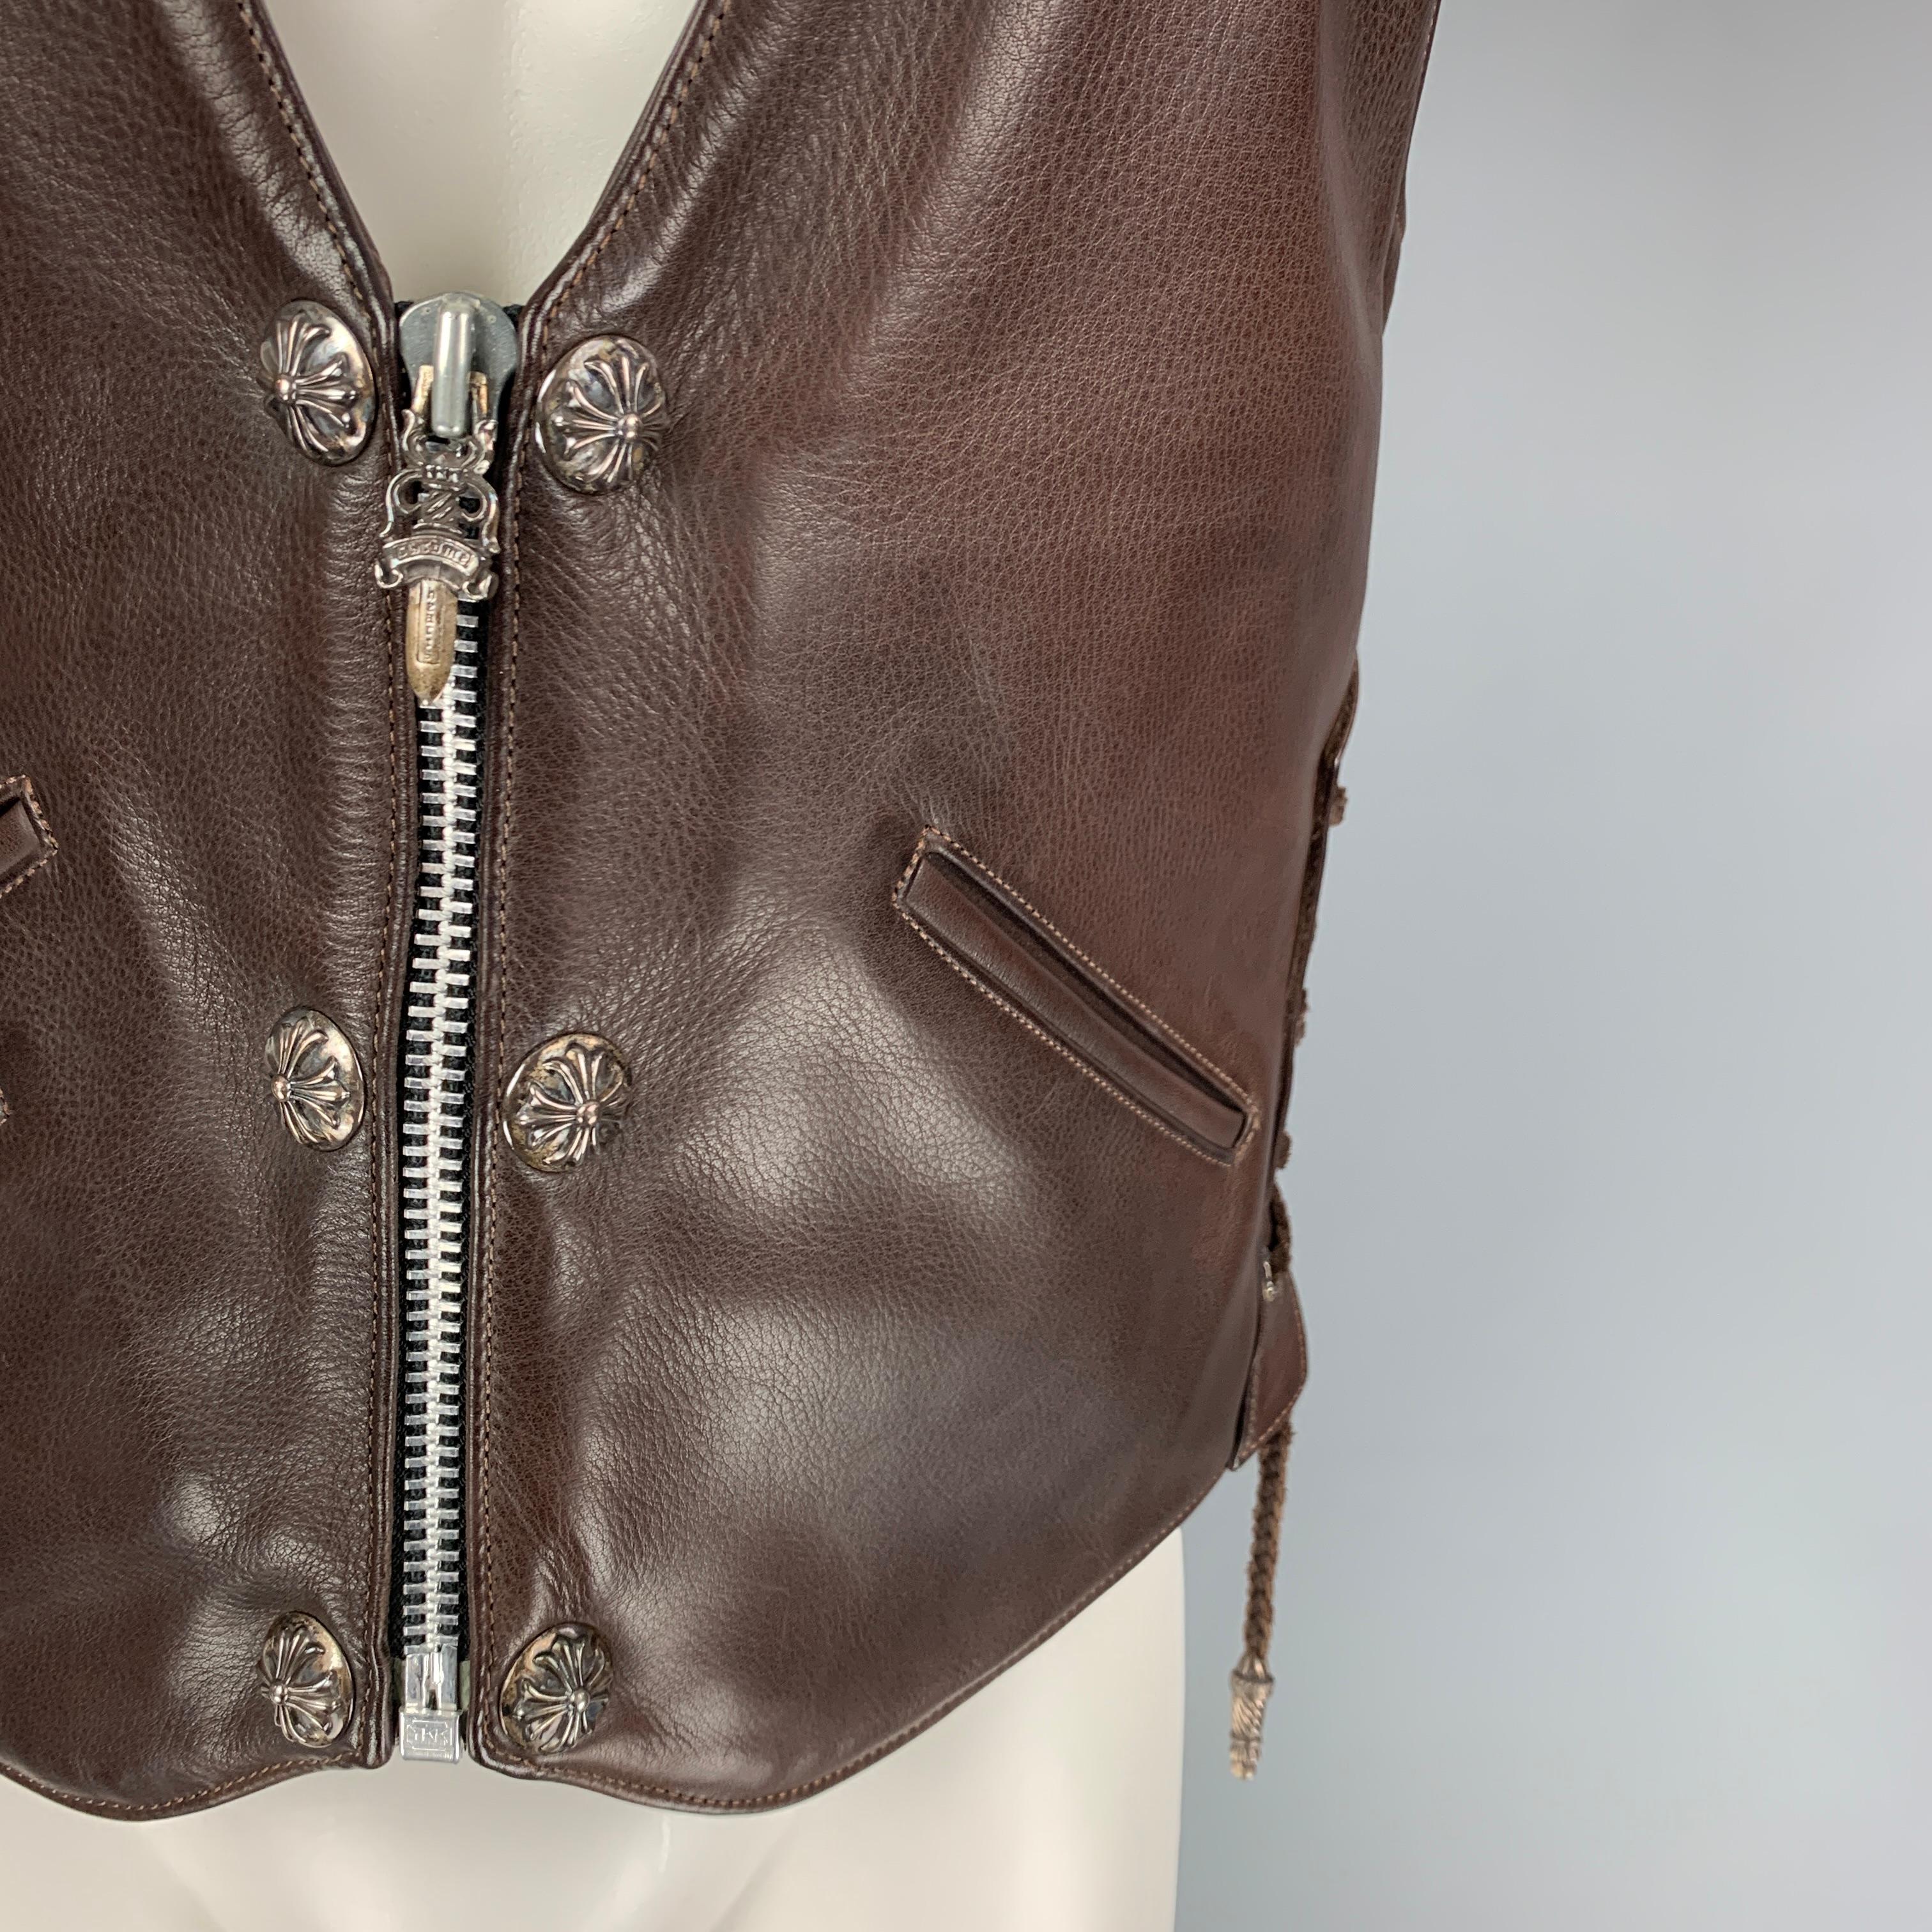 CHROME HEARTS vest comes in a thick lux brown leather with a full liner featuring side braided strap detail, silver tone hardware, one internal zip pocket, front silt pockets, back strap, and signature dagger zip up YKK closure. Made in USA. 

Very